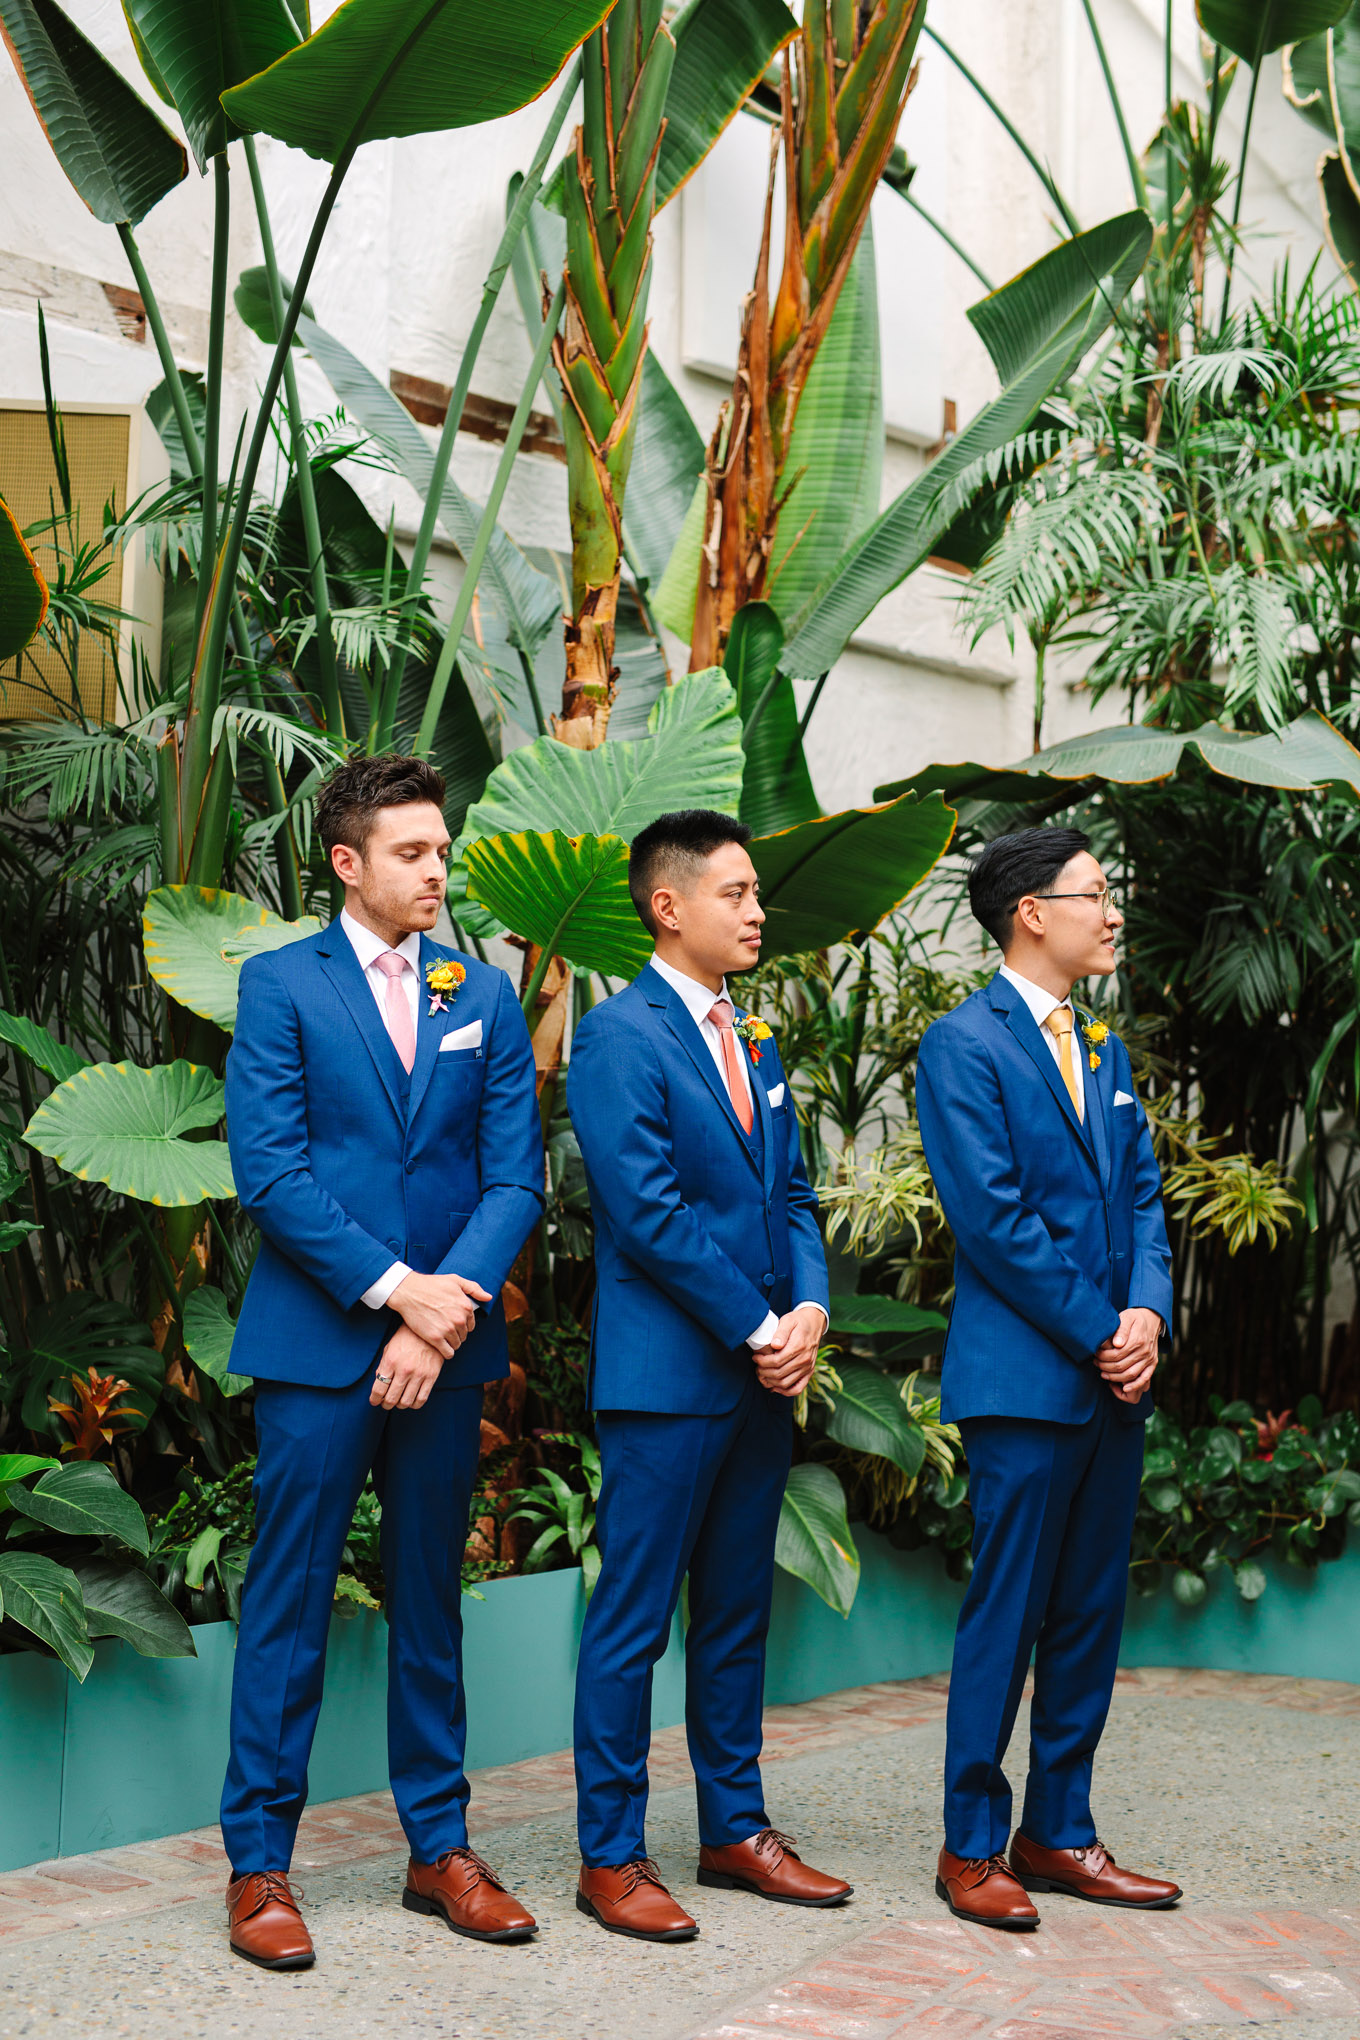 Groomsmen during wedding ceremony | Colorful Downtown Los Angeles Valentine Wedding | Los Angeles wedding photographer | #losangeleswedding #colorfulwedding #DTLA #valentinedtla   Source: Mary Costa Photography | Los Angeles